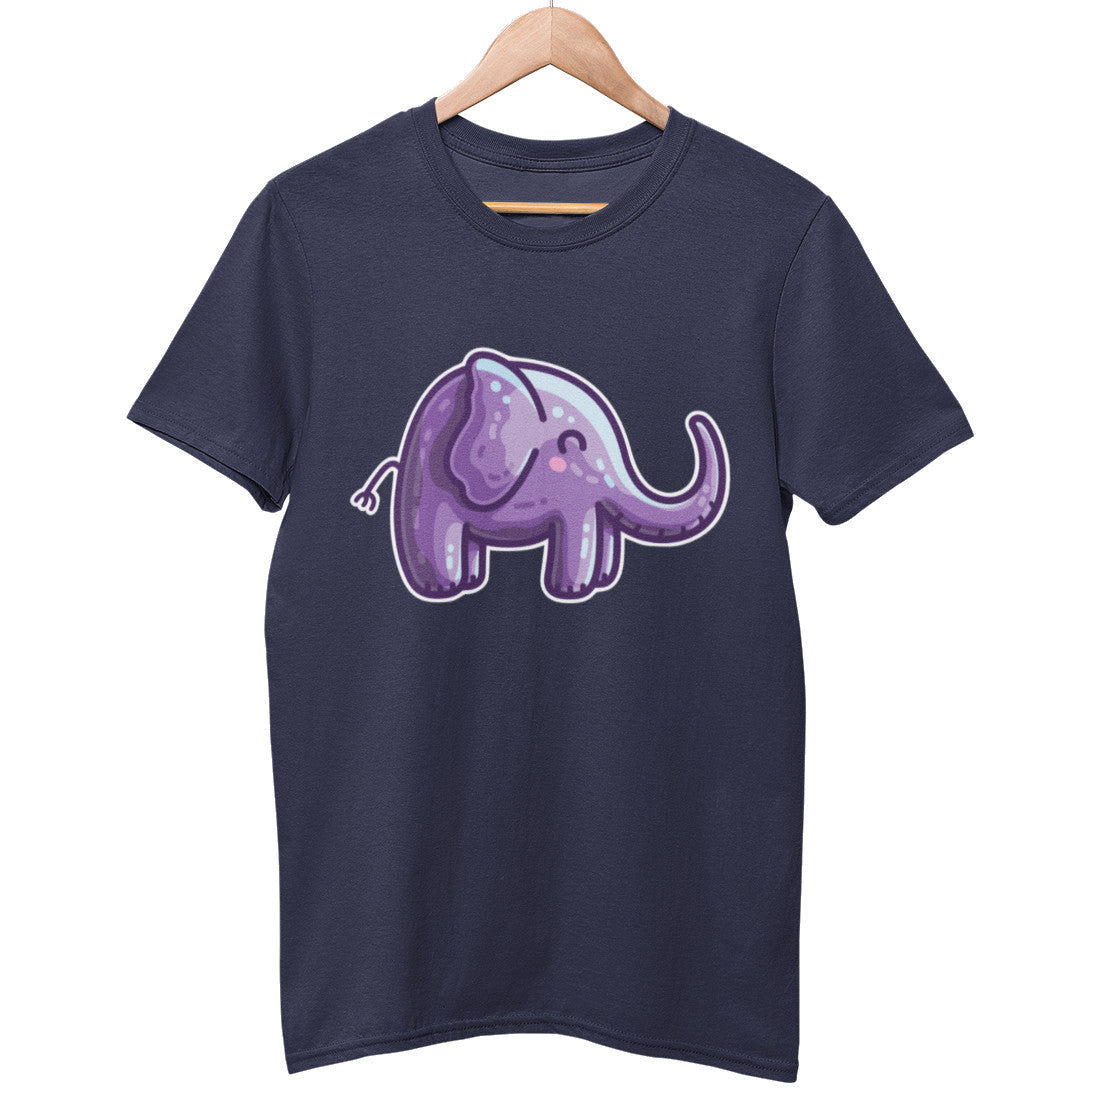 A dark navy blue unisex crewneck t-shirt on a hanger with a design on its chest of a kawaii cute purple elephant standing seen side on facing to the right